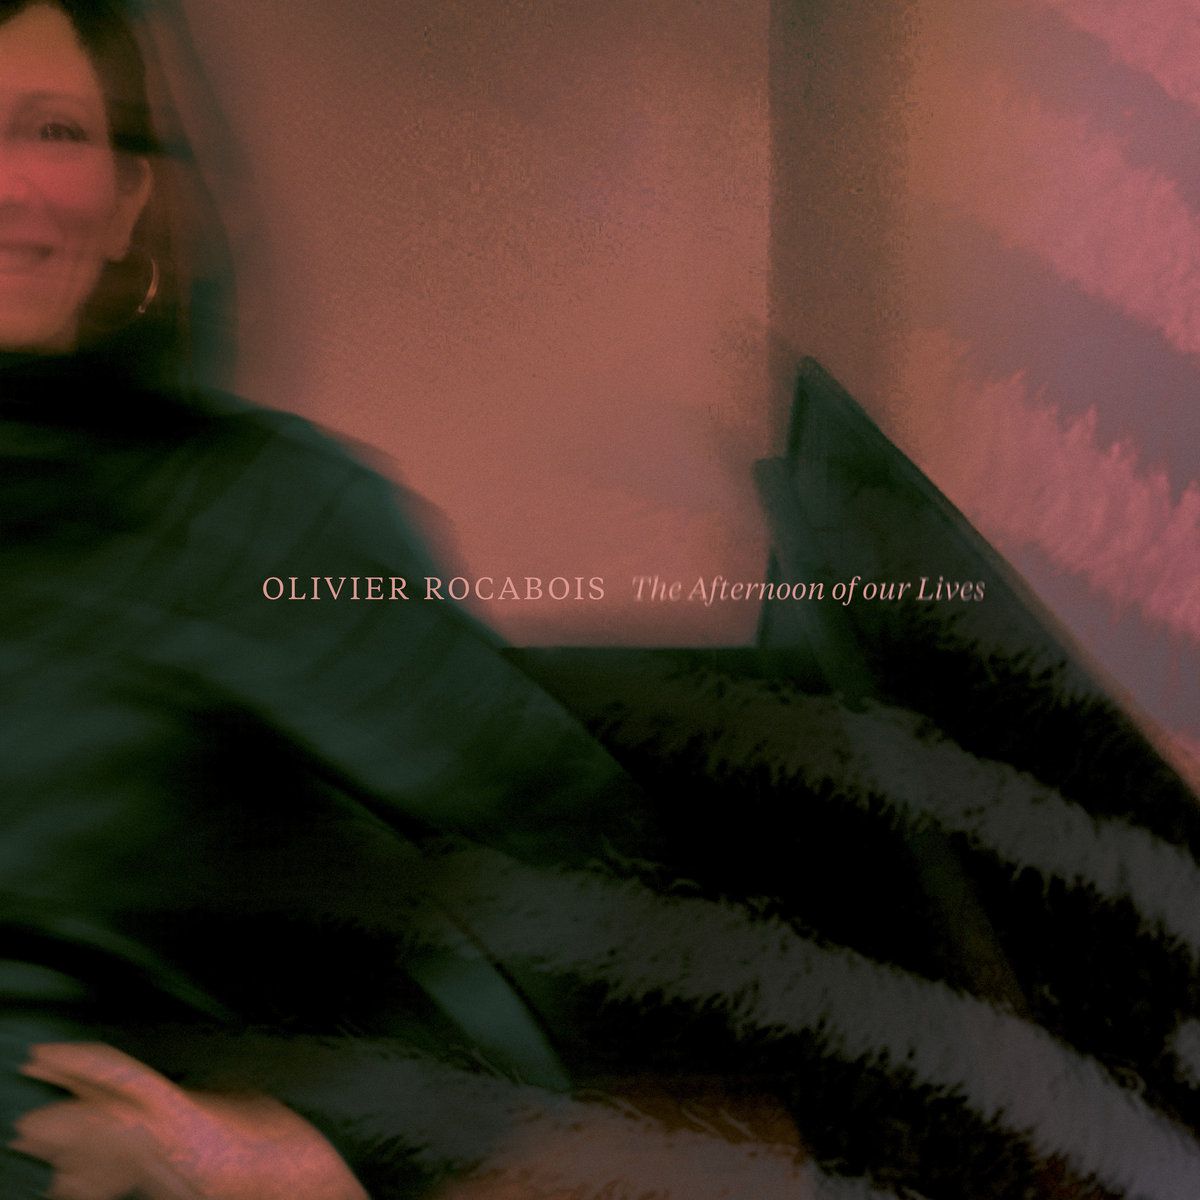 Olivier Rocabois – The Afternoon of our Lives 